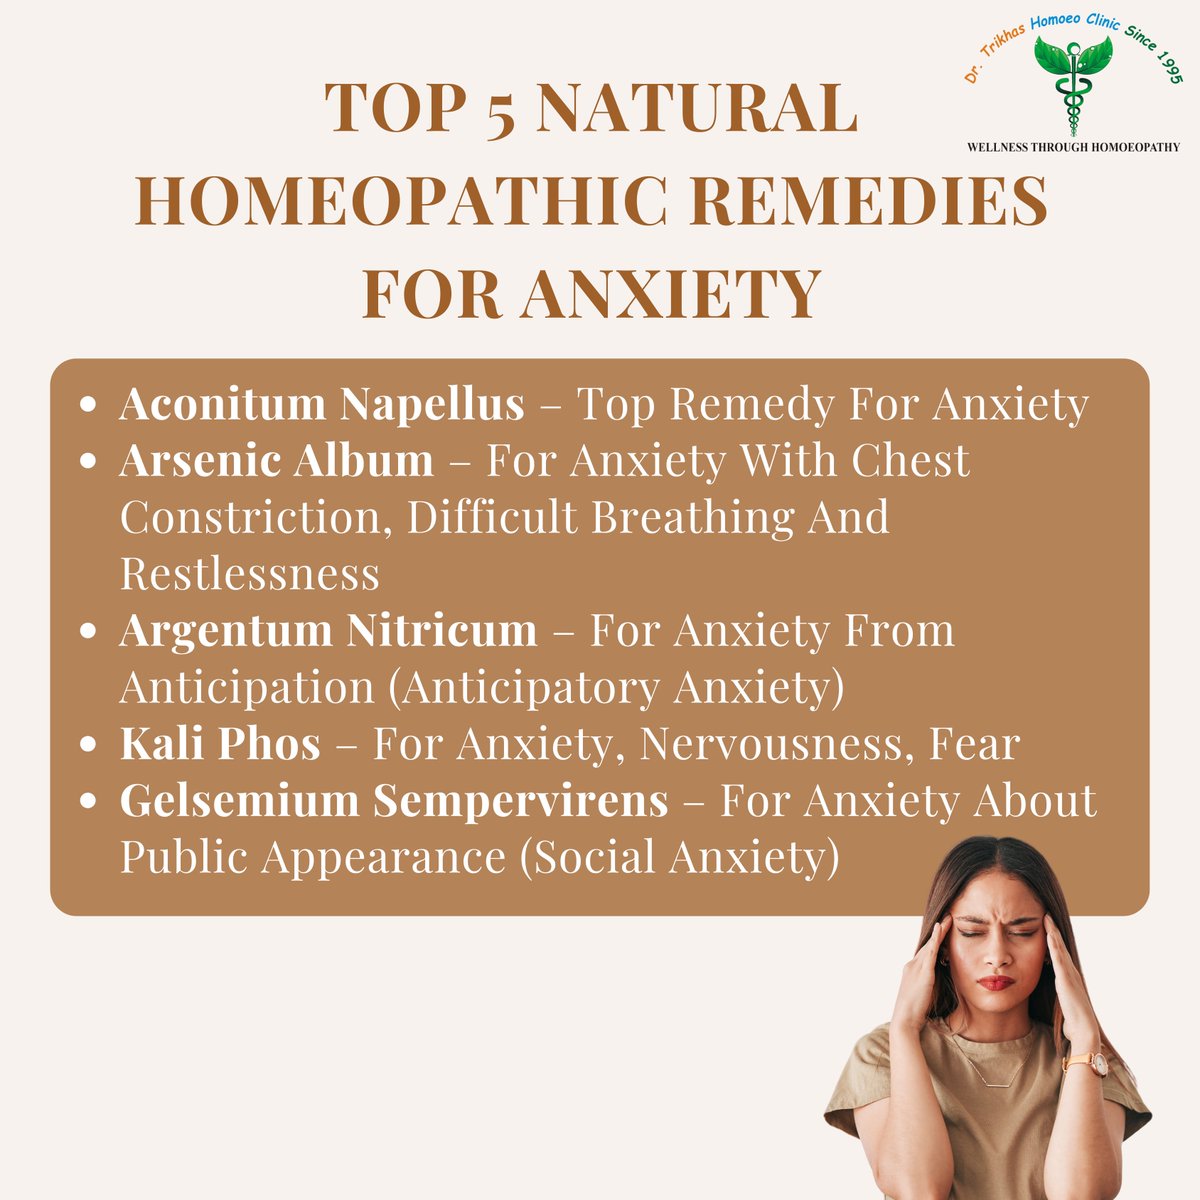 Top 5 Natural Homeopathic Remedies for Anxiety. . . . #anxiety #anxietyrelief #anxietysupport #anxietyawareness #homeopathicmedicine #homeopathicremedies #Homeopathy #homeopathic #homeopathyheals